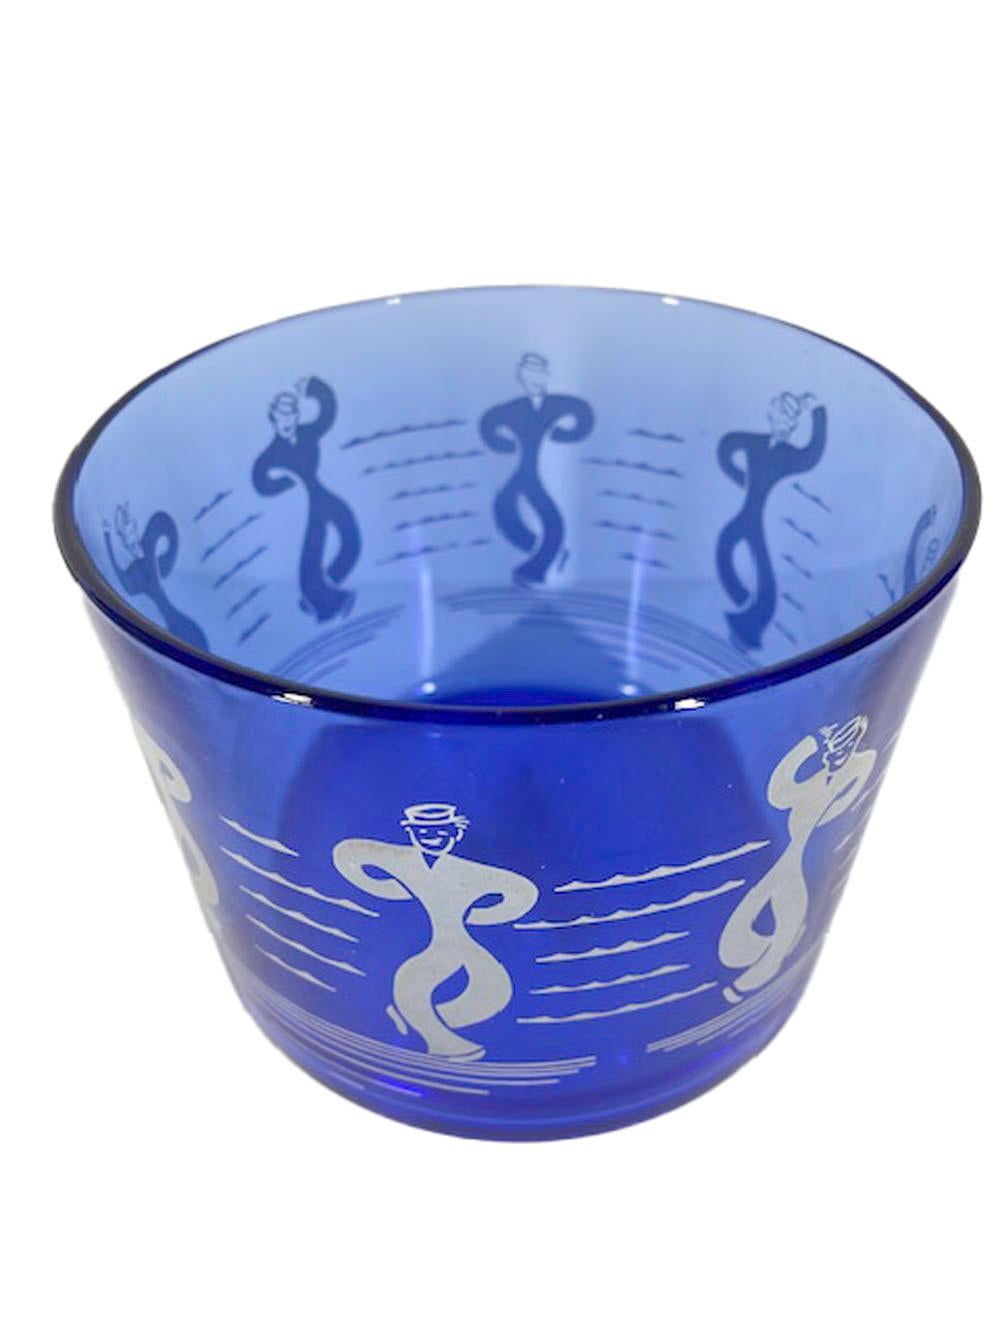 Hazel Atlas White on Cobalt Dancing Sailors Ice Bowl from the Sportsman Series In Good Condition For Sale In Nantucket, MA